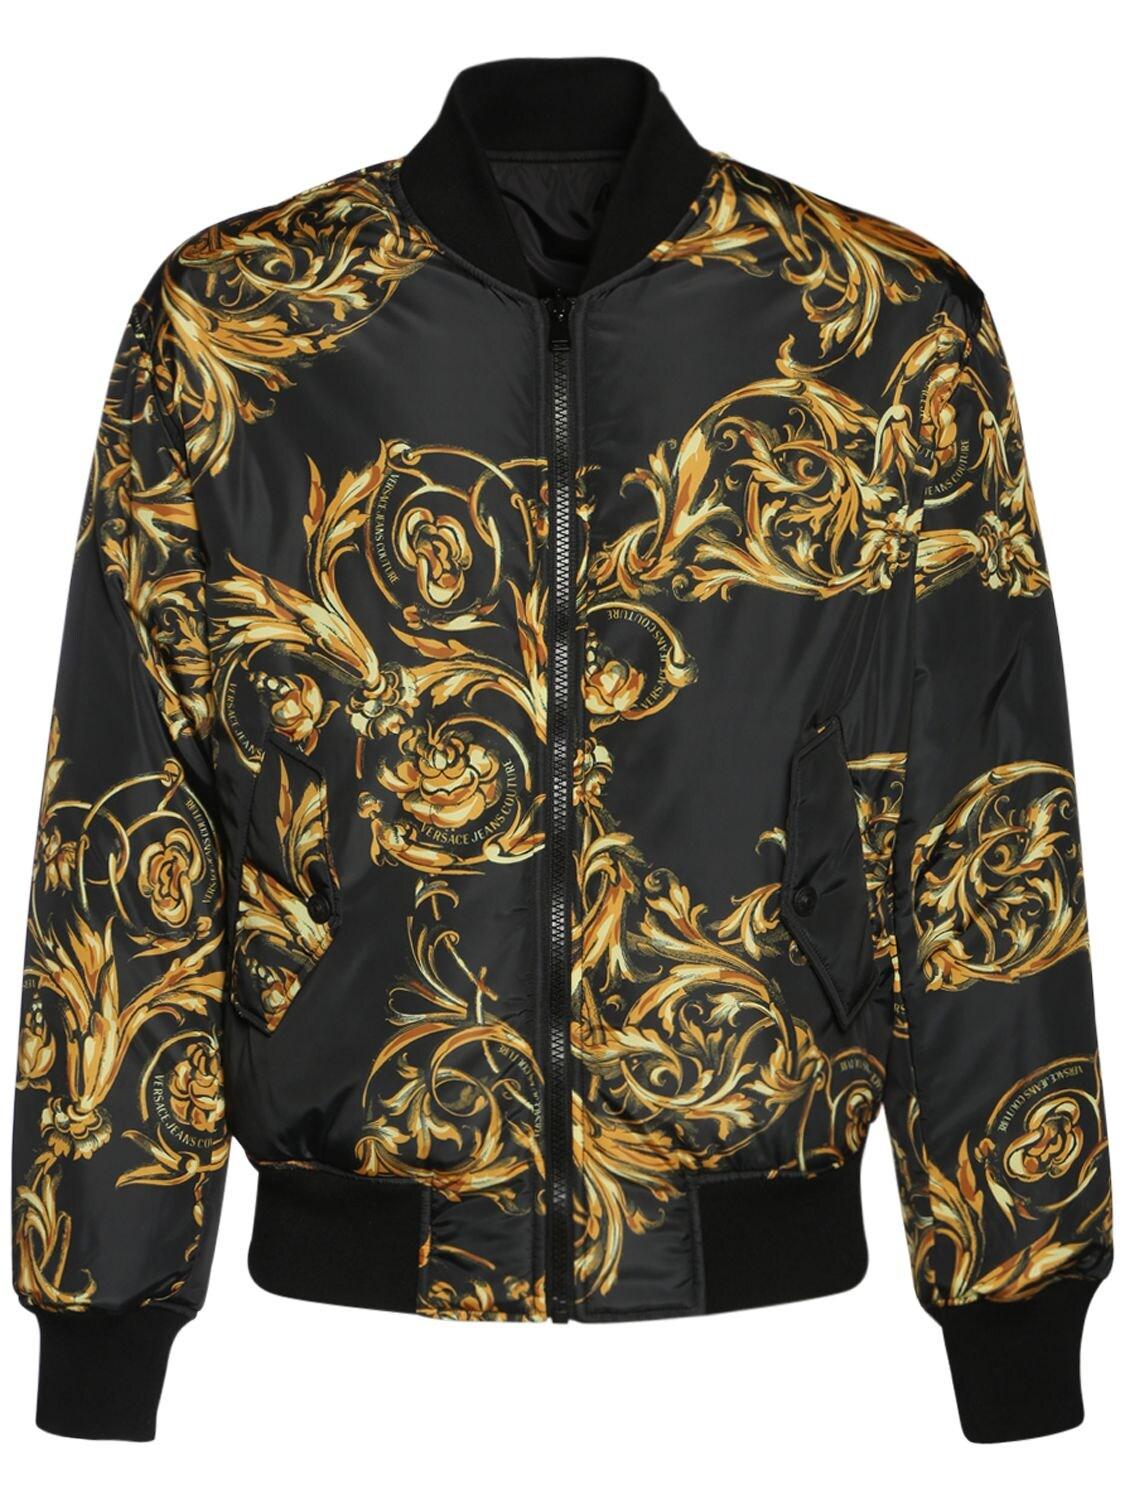 Versace Jeans Couture Reversible Garland Print Bomber Jacket in Black/Gold  (Black) for Men | Lyst